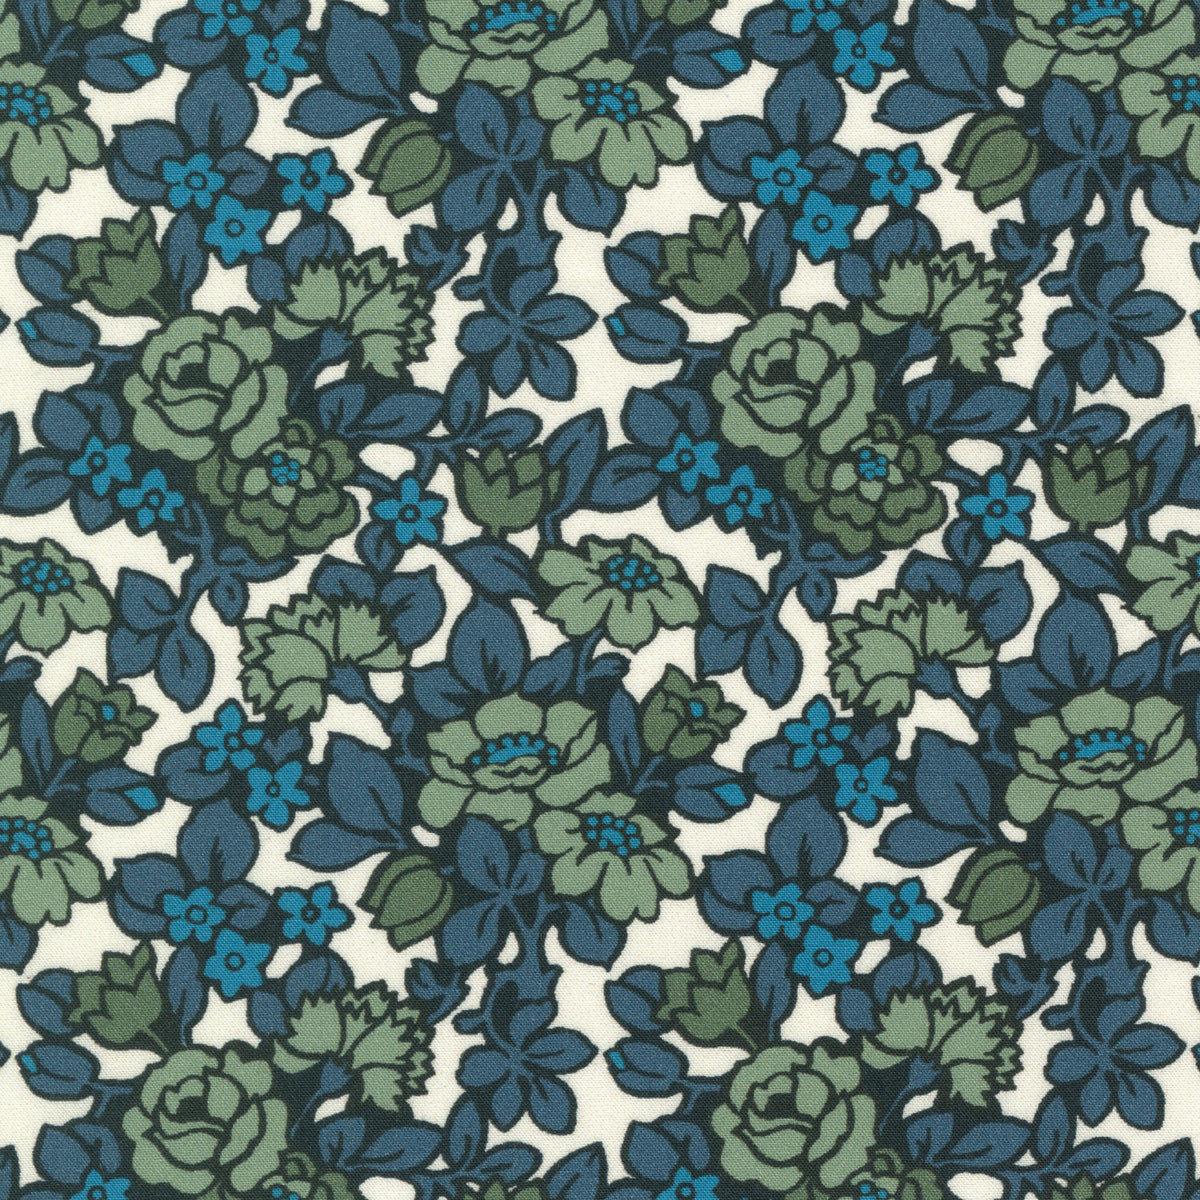 Made-to-Order Fabric in Green/Blue Multi Anthology Liberty Fabric